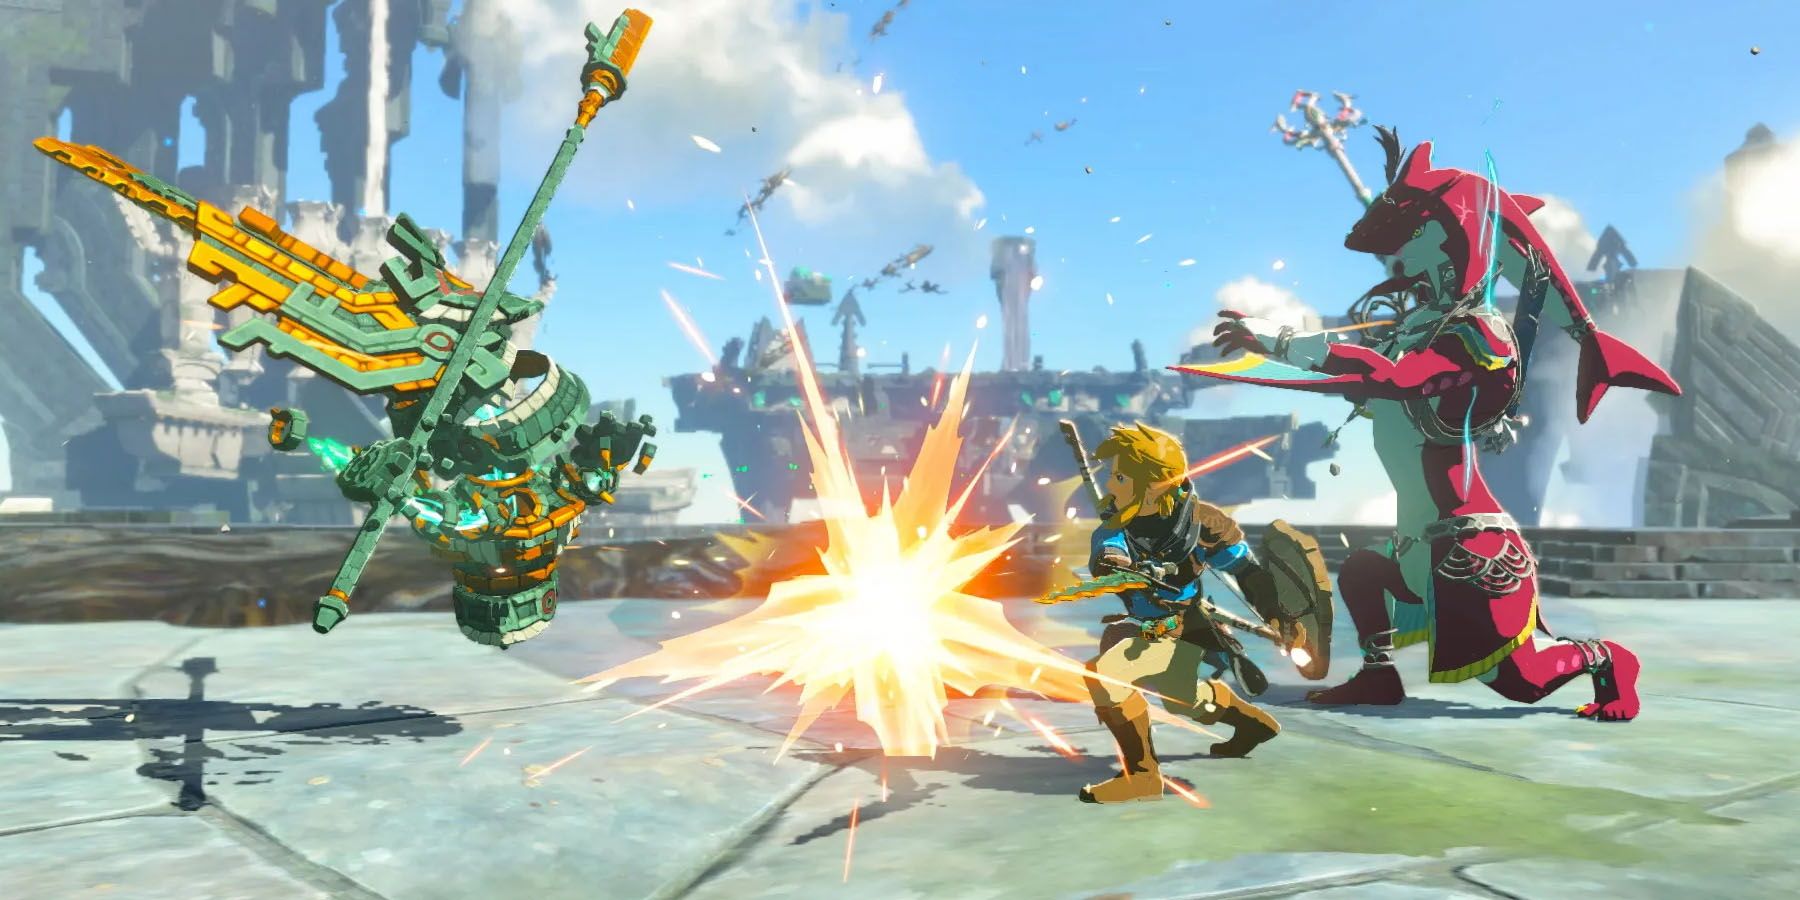 A screenshot of Link and Sidon battling an enemy in The Legend of Zelda: Tears of the Kingdom.